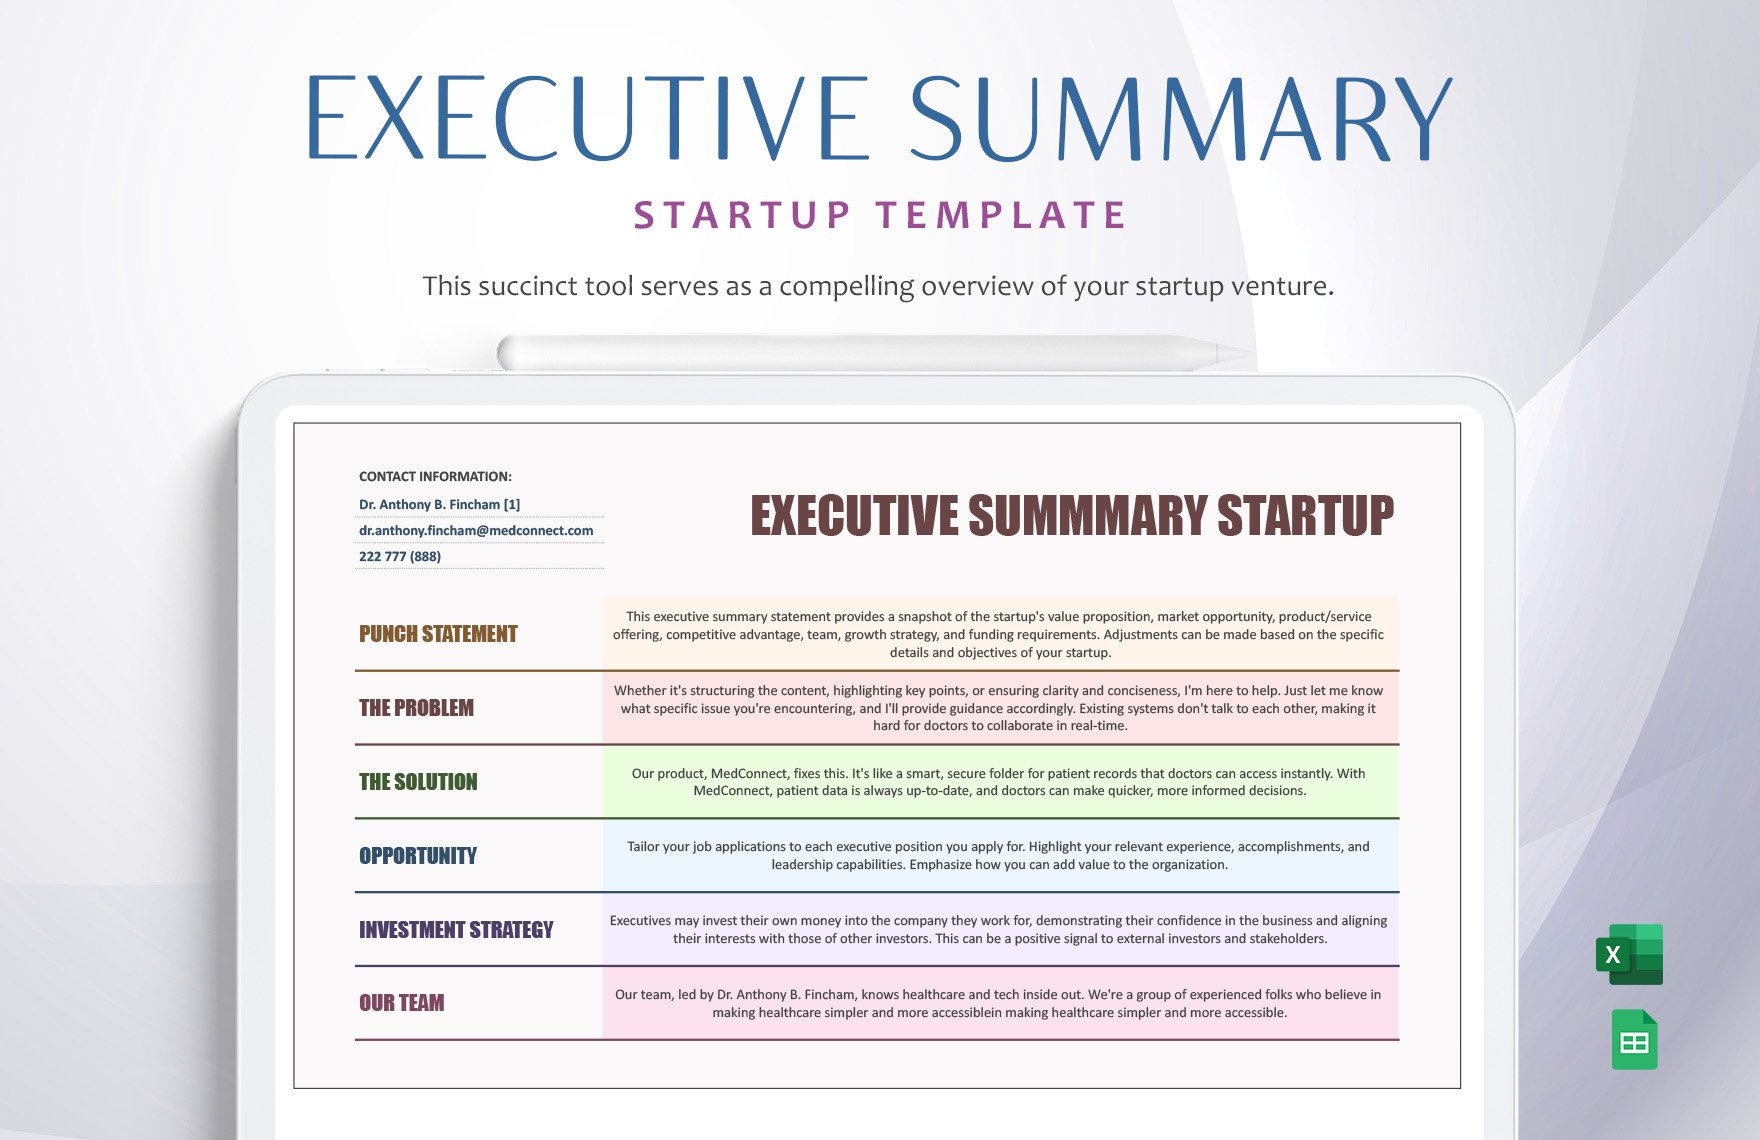 Executive Summary Startup Template in Excel, Google Sheets